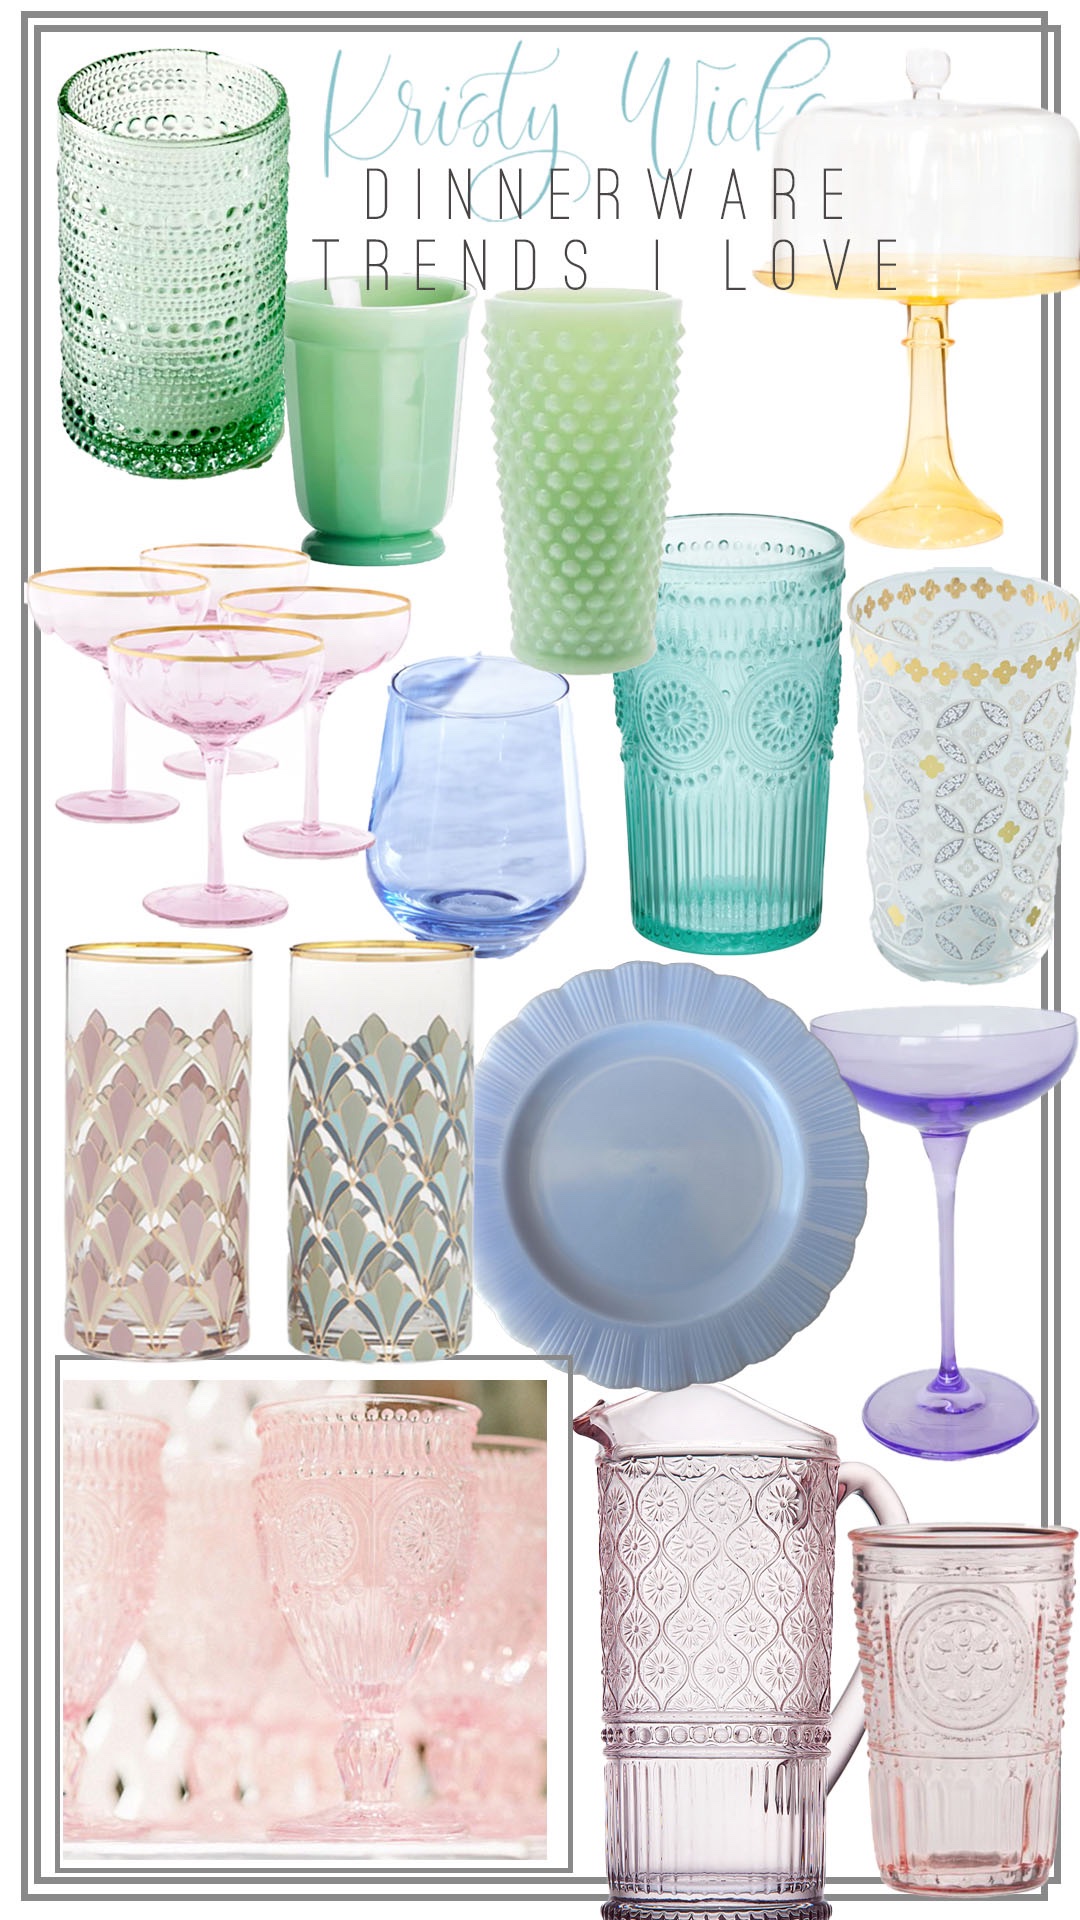 Collage of Dinnerware and Glassware including Milk Glass, Hobnail, Depression Glass, and Art Deco pieces